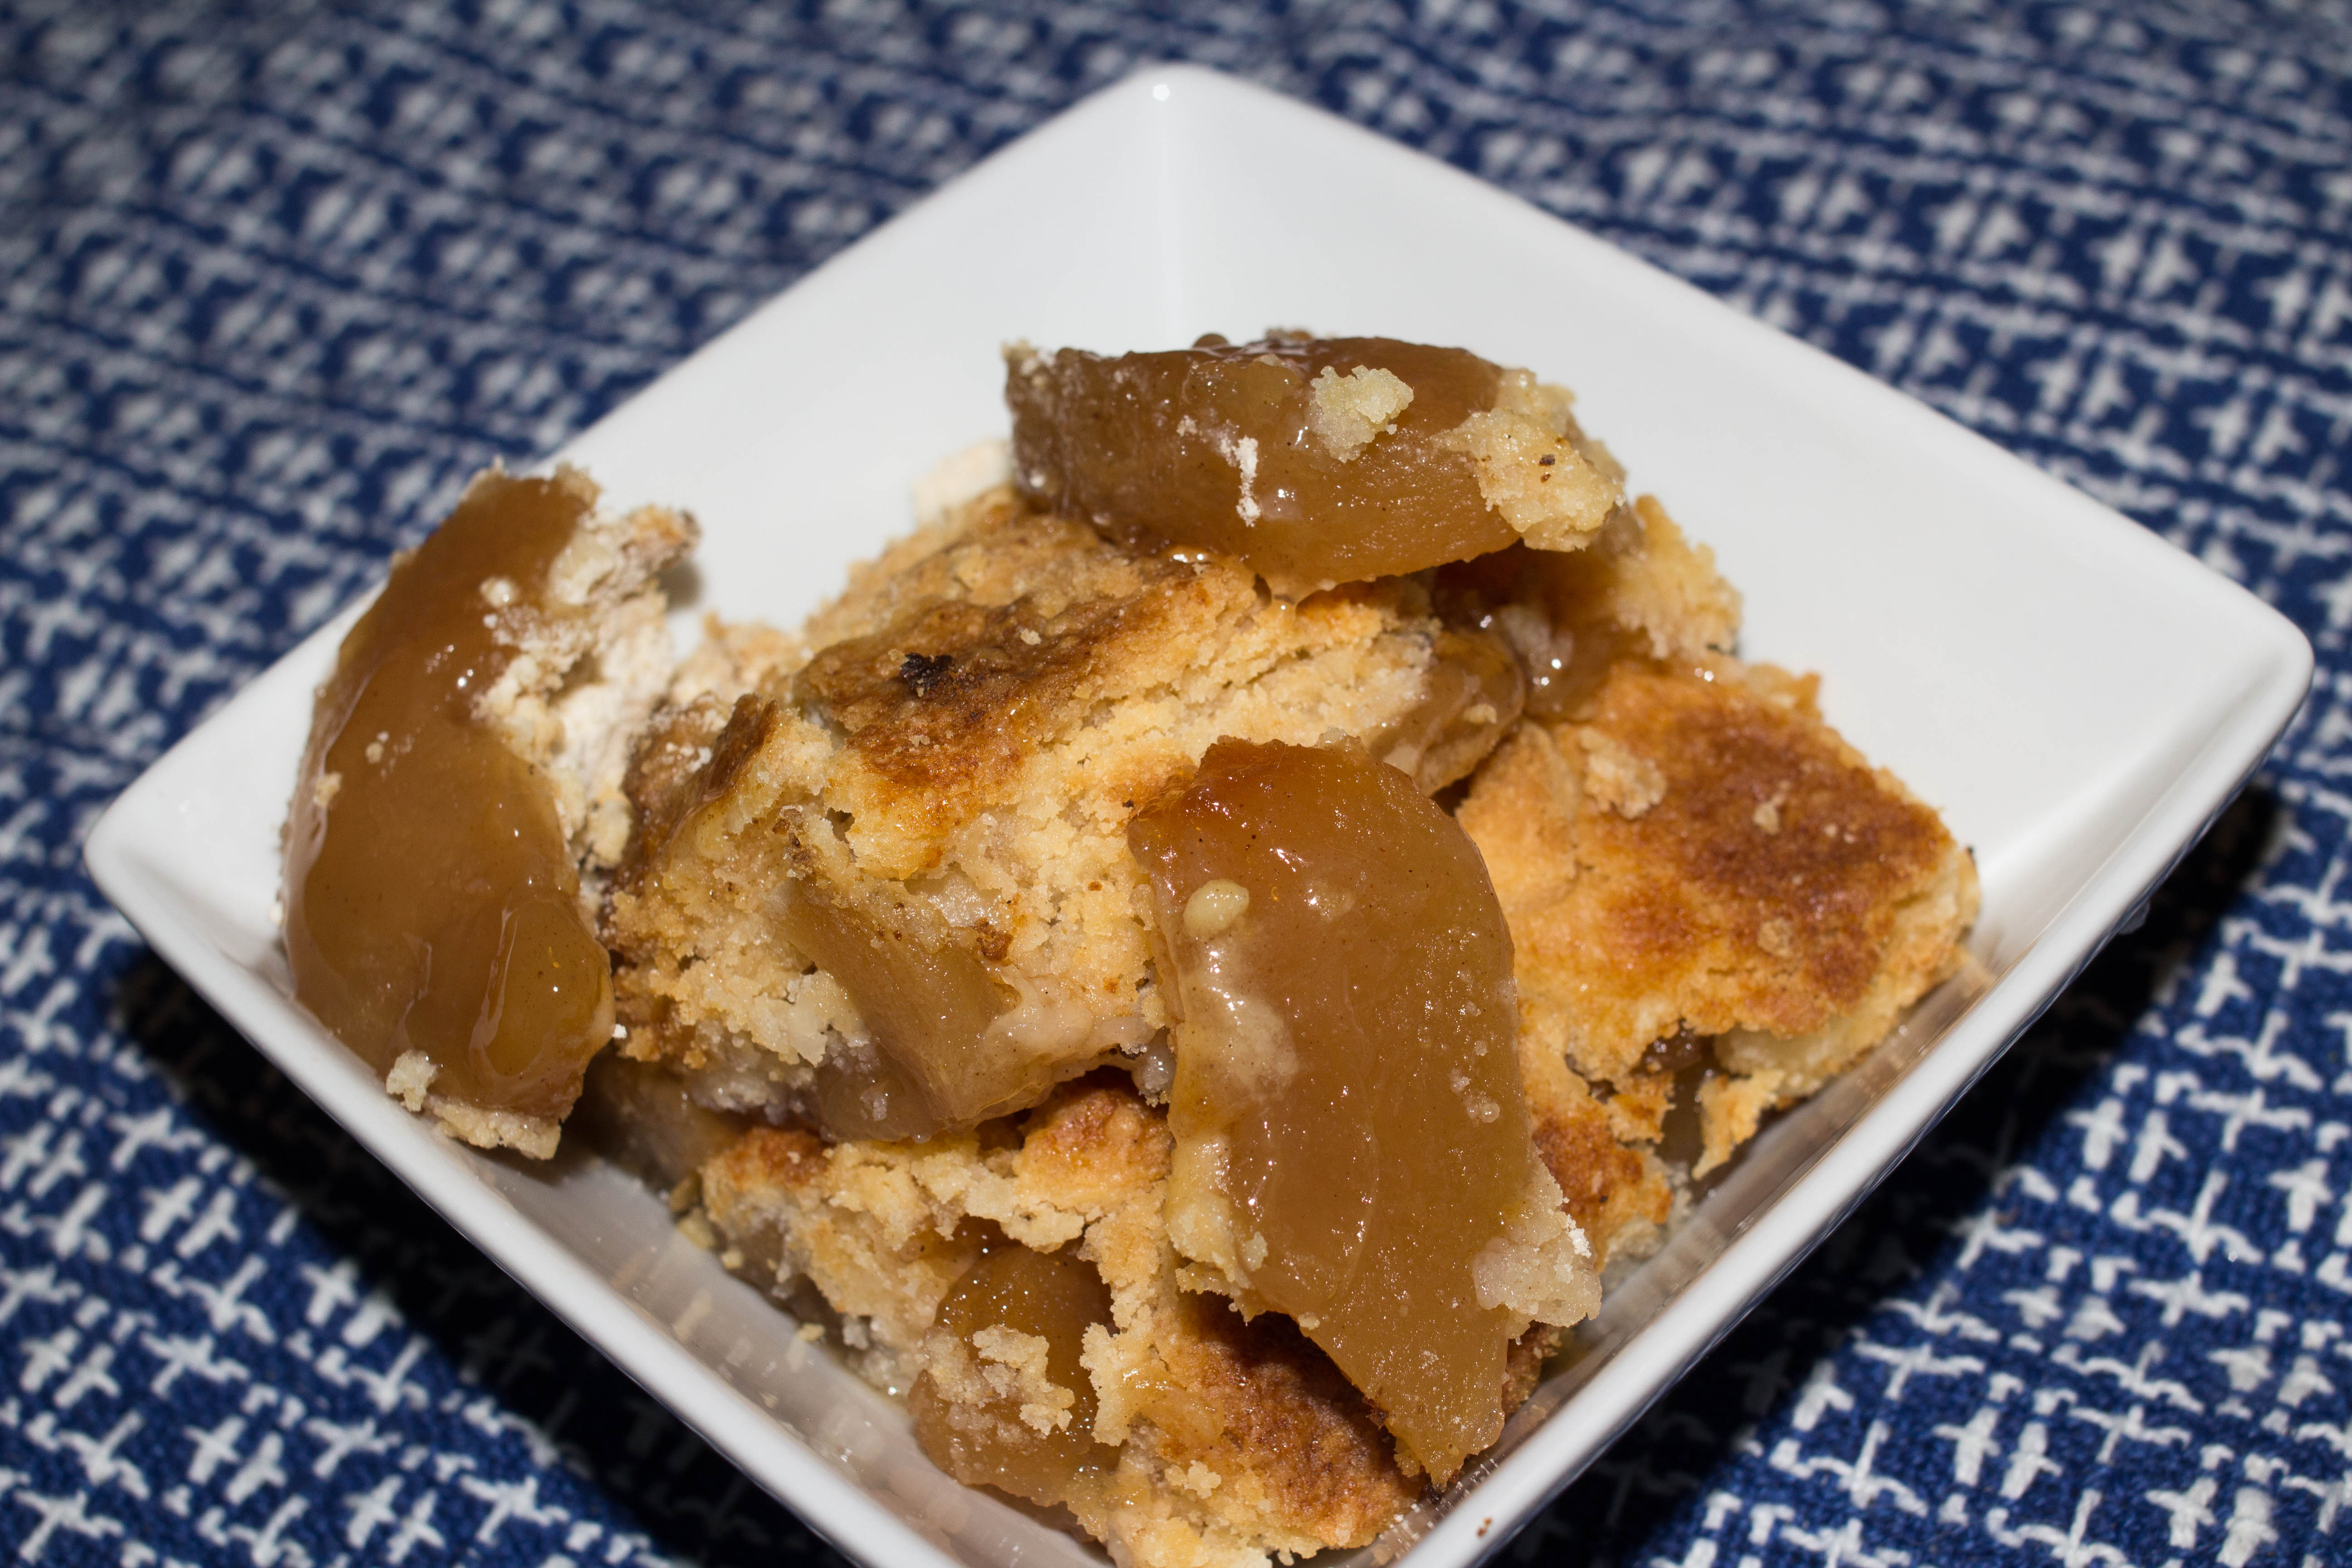 Looking for a recipe hack that makes life easier. Try this Hack Simple Apple Cobbler Recipe that is only 3 ingredients. It's guaranteed to disappear.